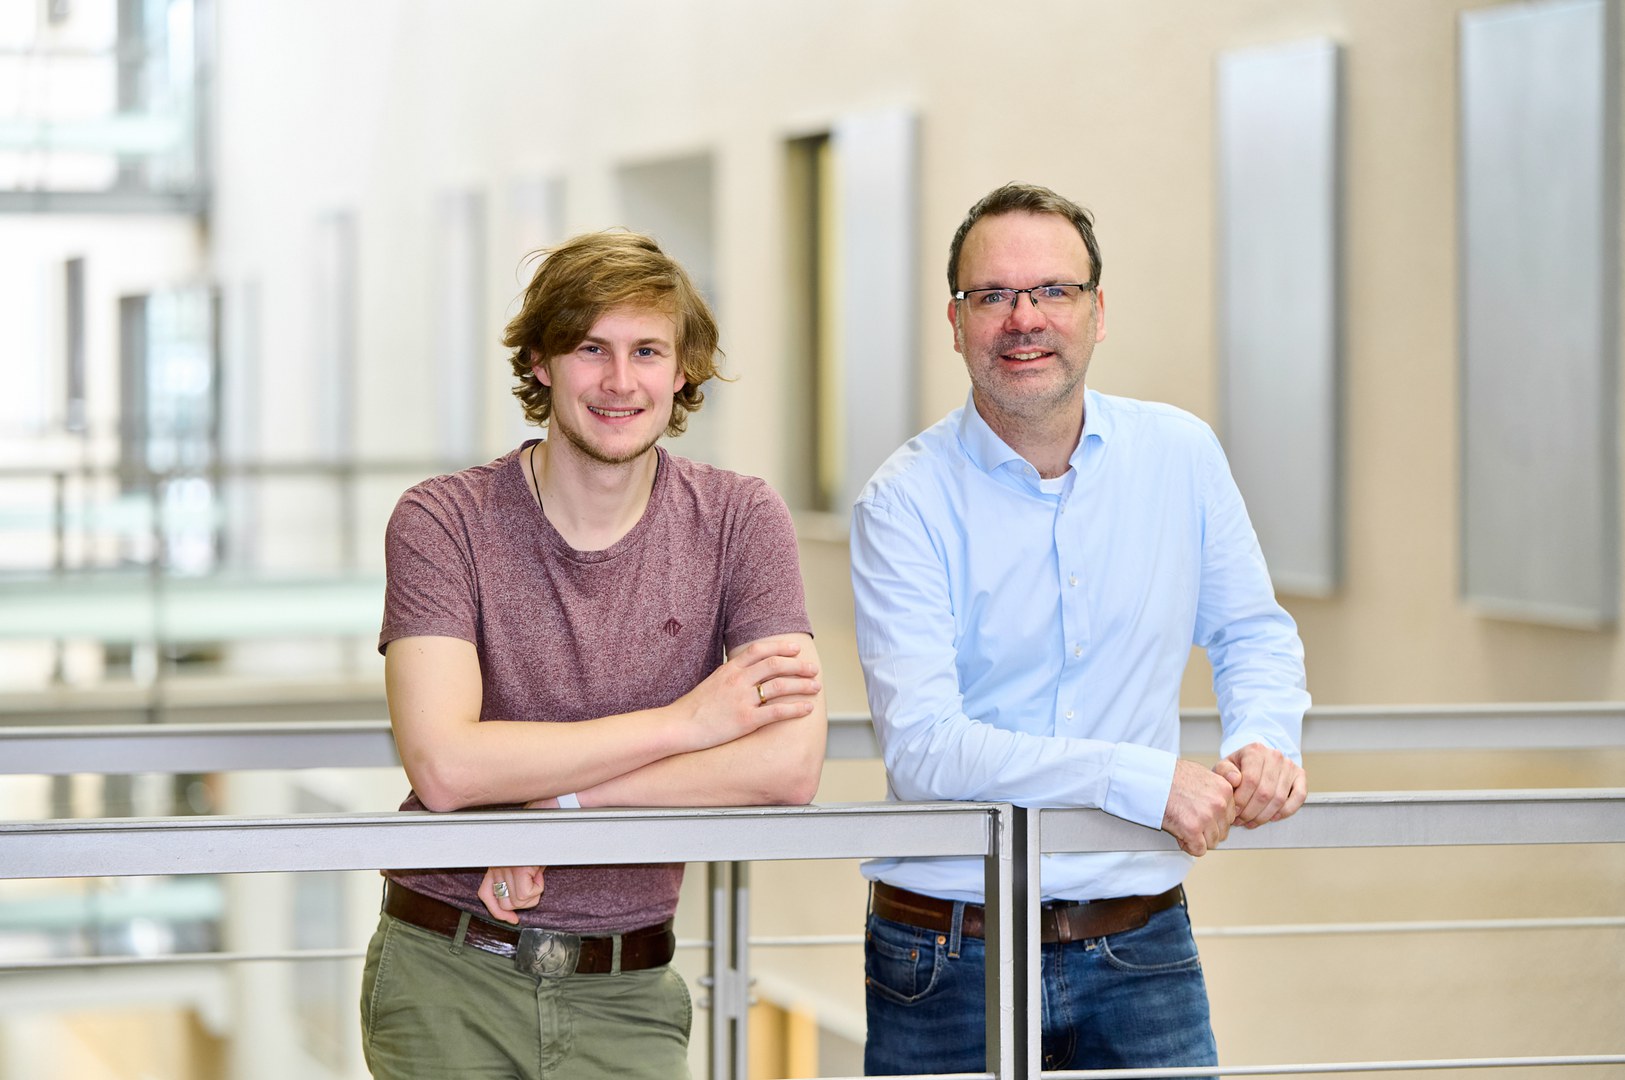 (from the left) Niels Schneberger, doctoral student at UKB's Institute of Structural Biology, with PD Dr. Gregor Hagelueken, group leader at the Institute of Structural Biology at UKB.